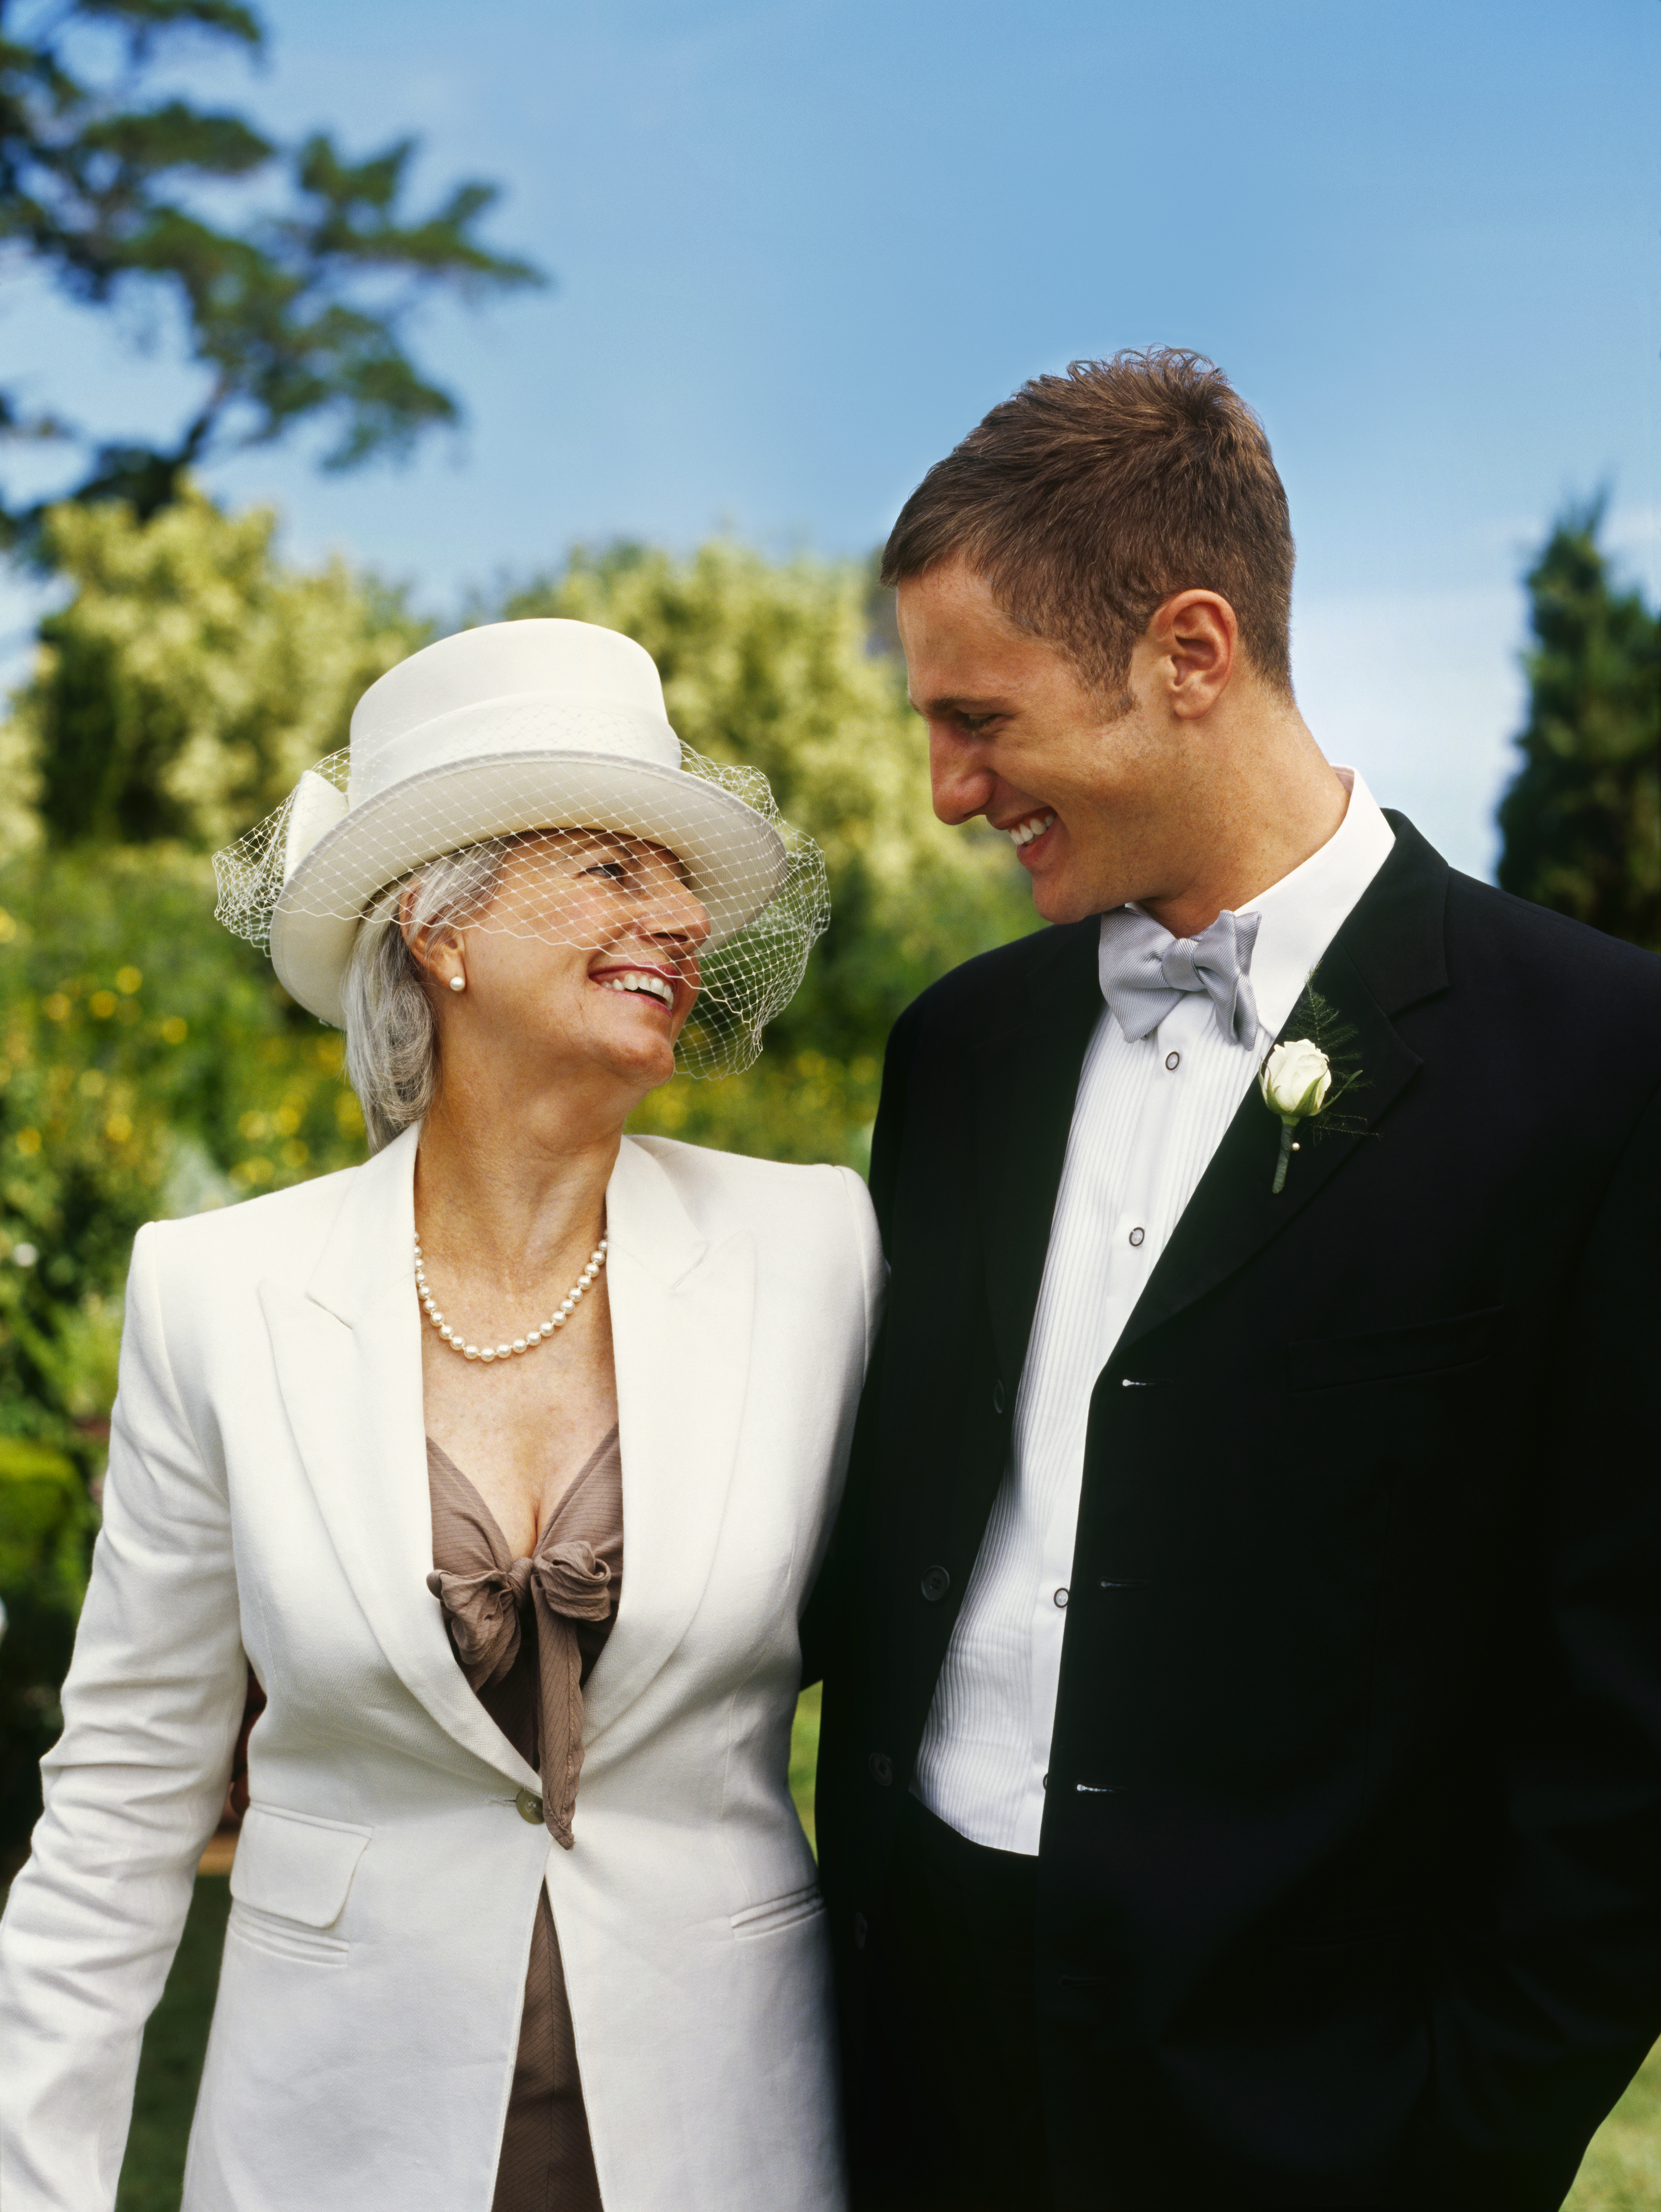 Groom smiling while standing with his mom | Source: Getty Images